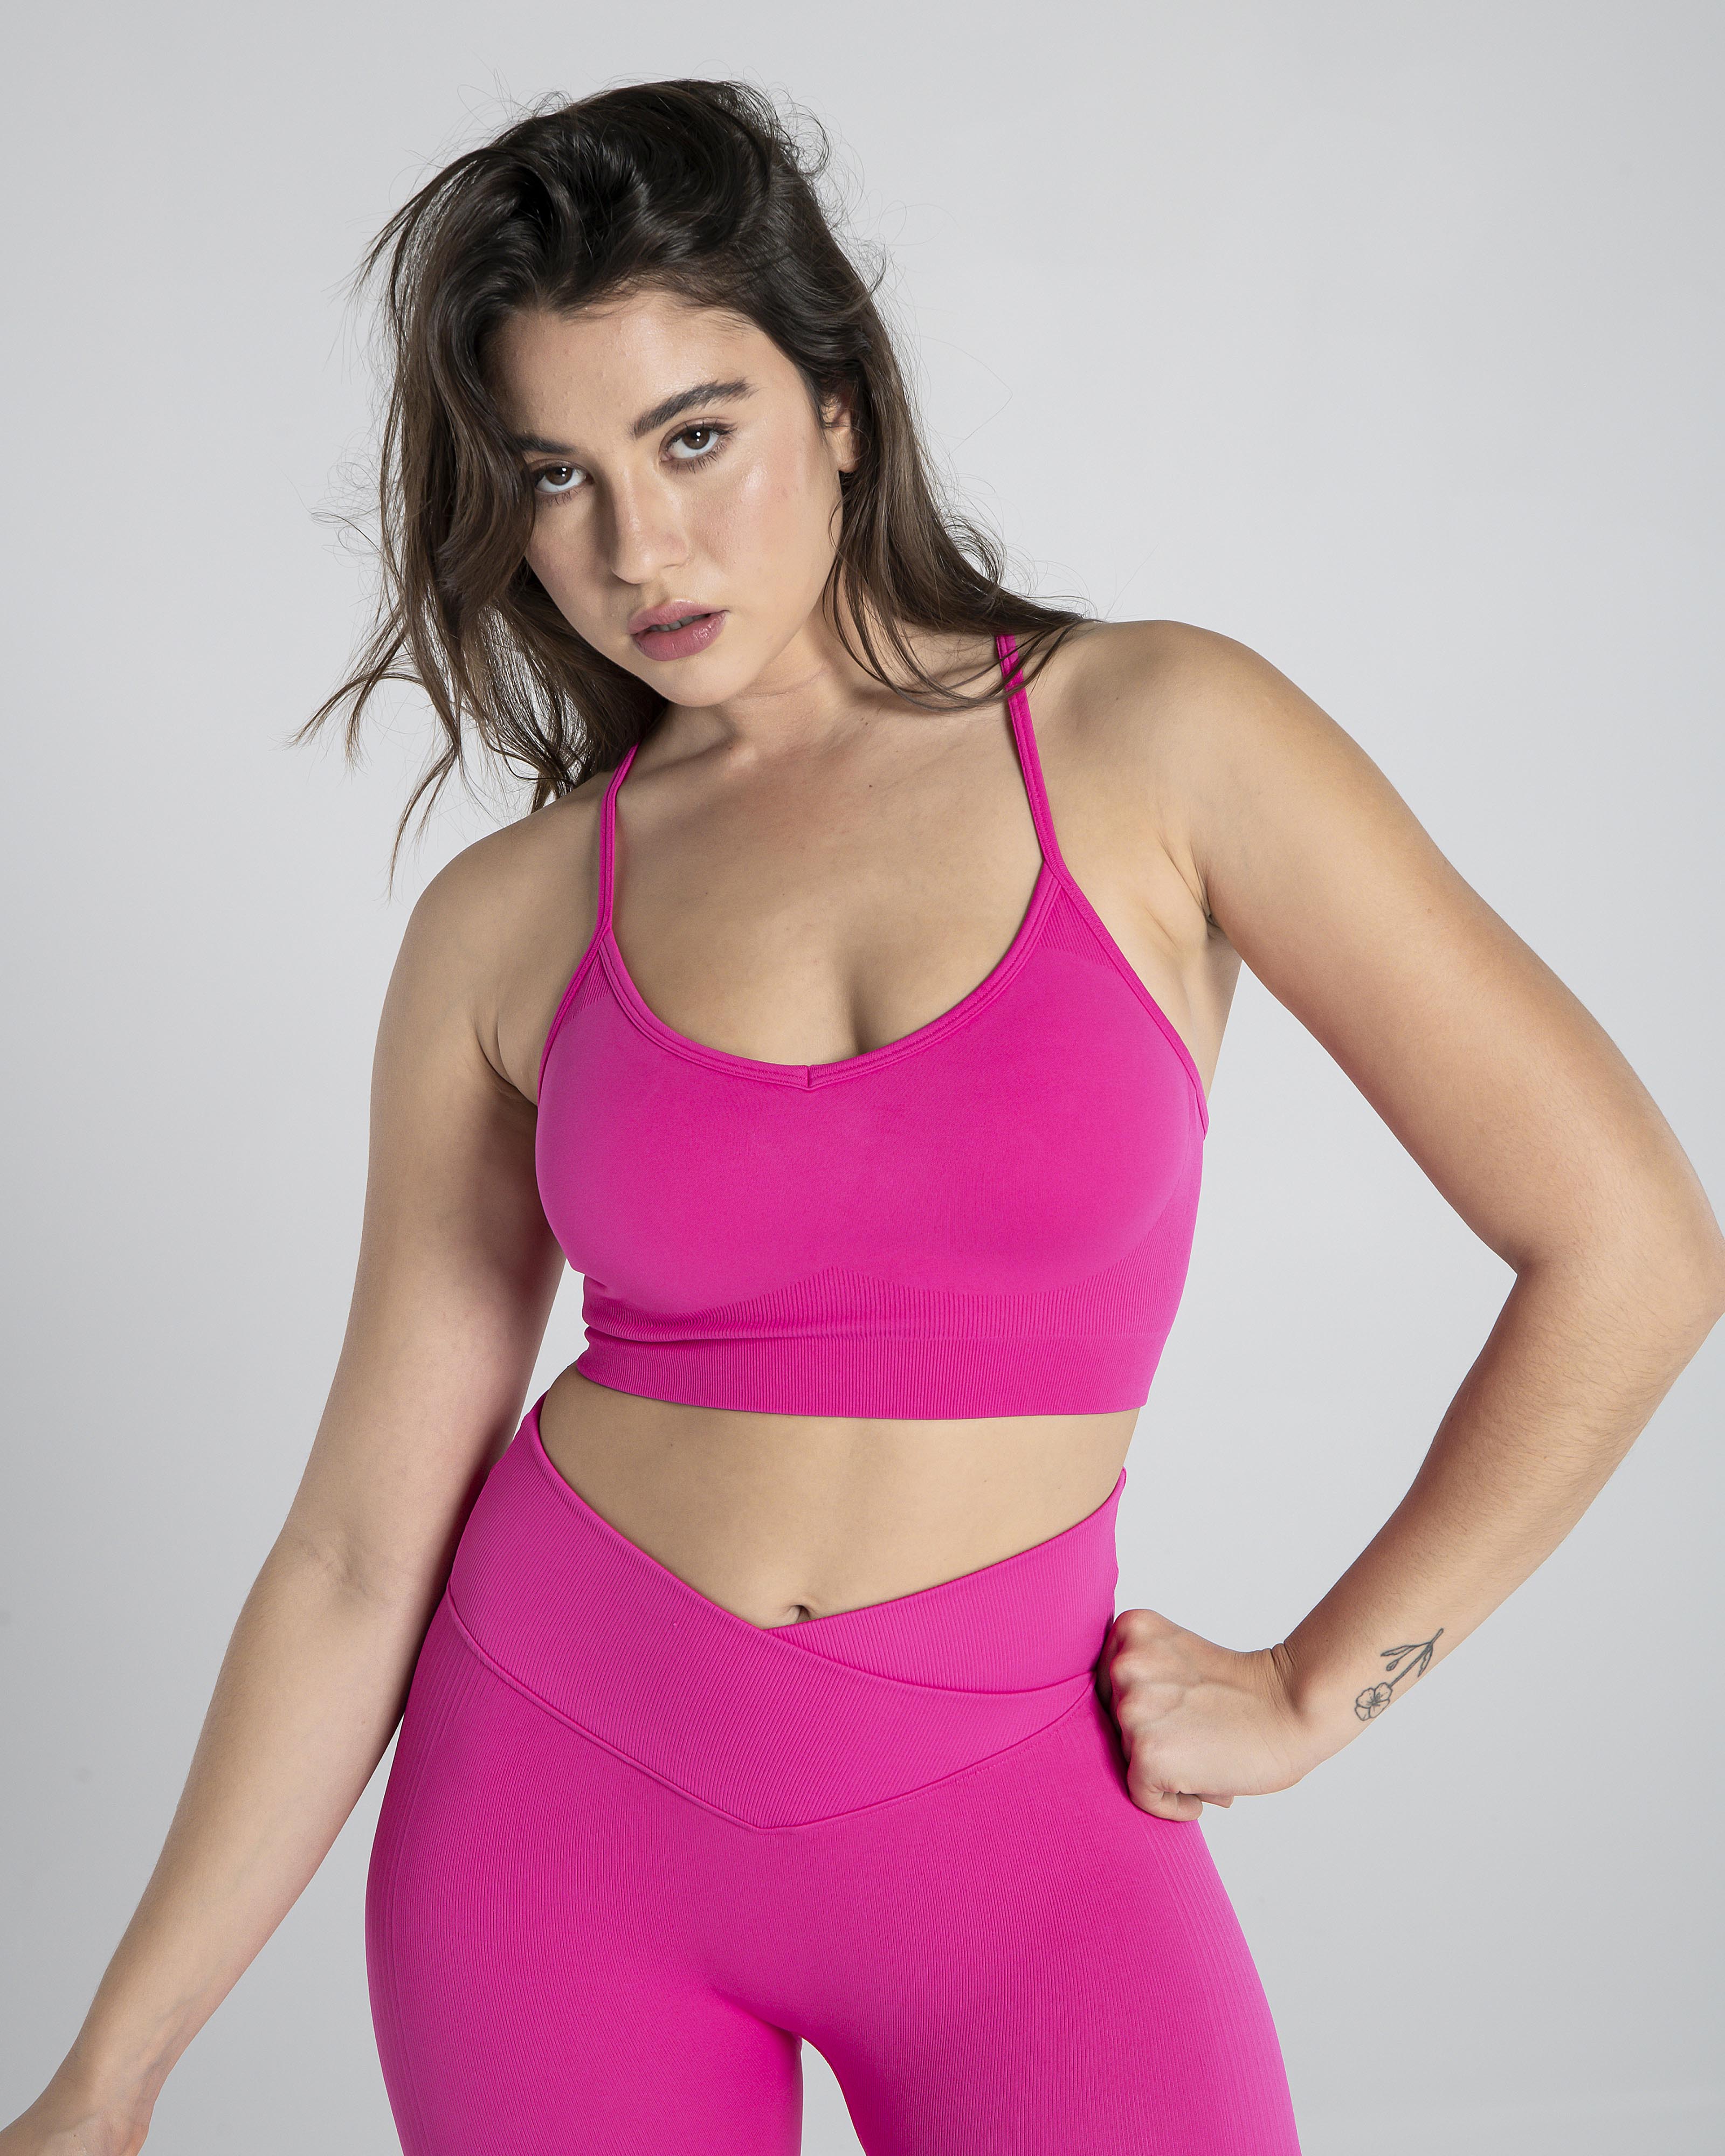 Cosmolle Activewear You Should Add to Your Workout Wardrobe